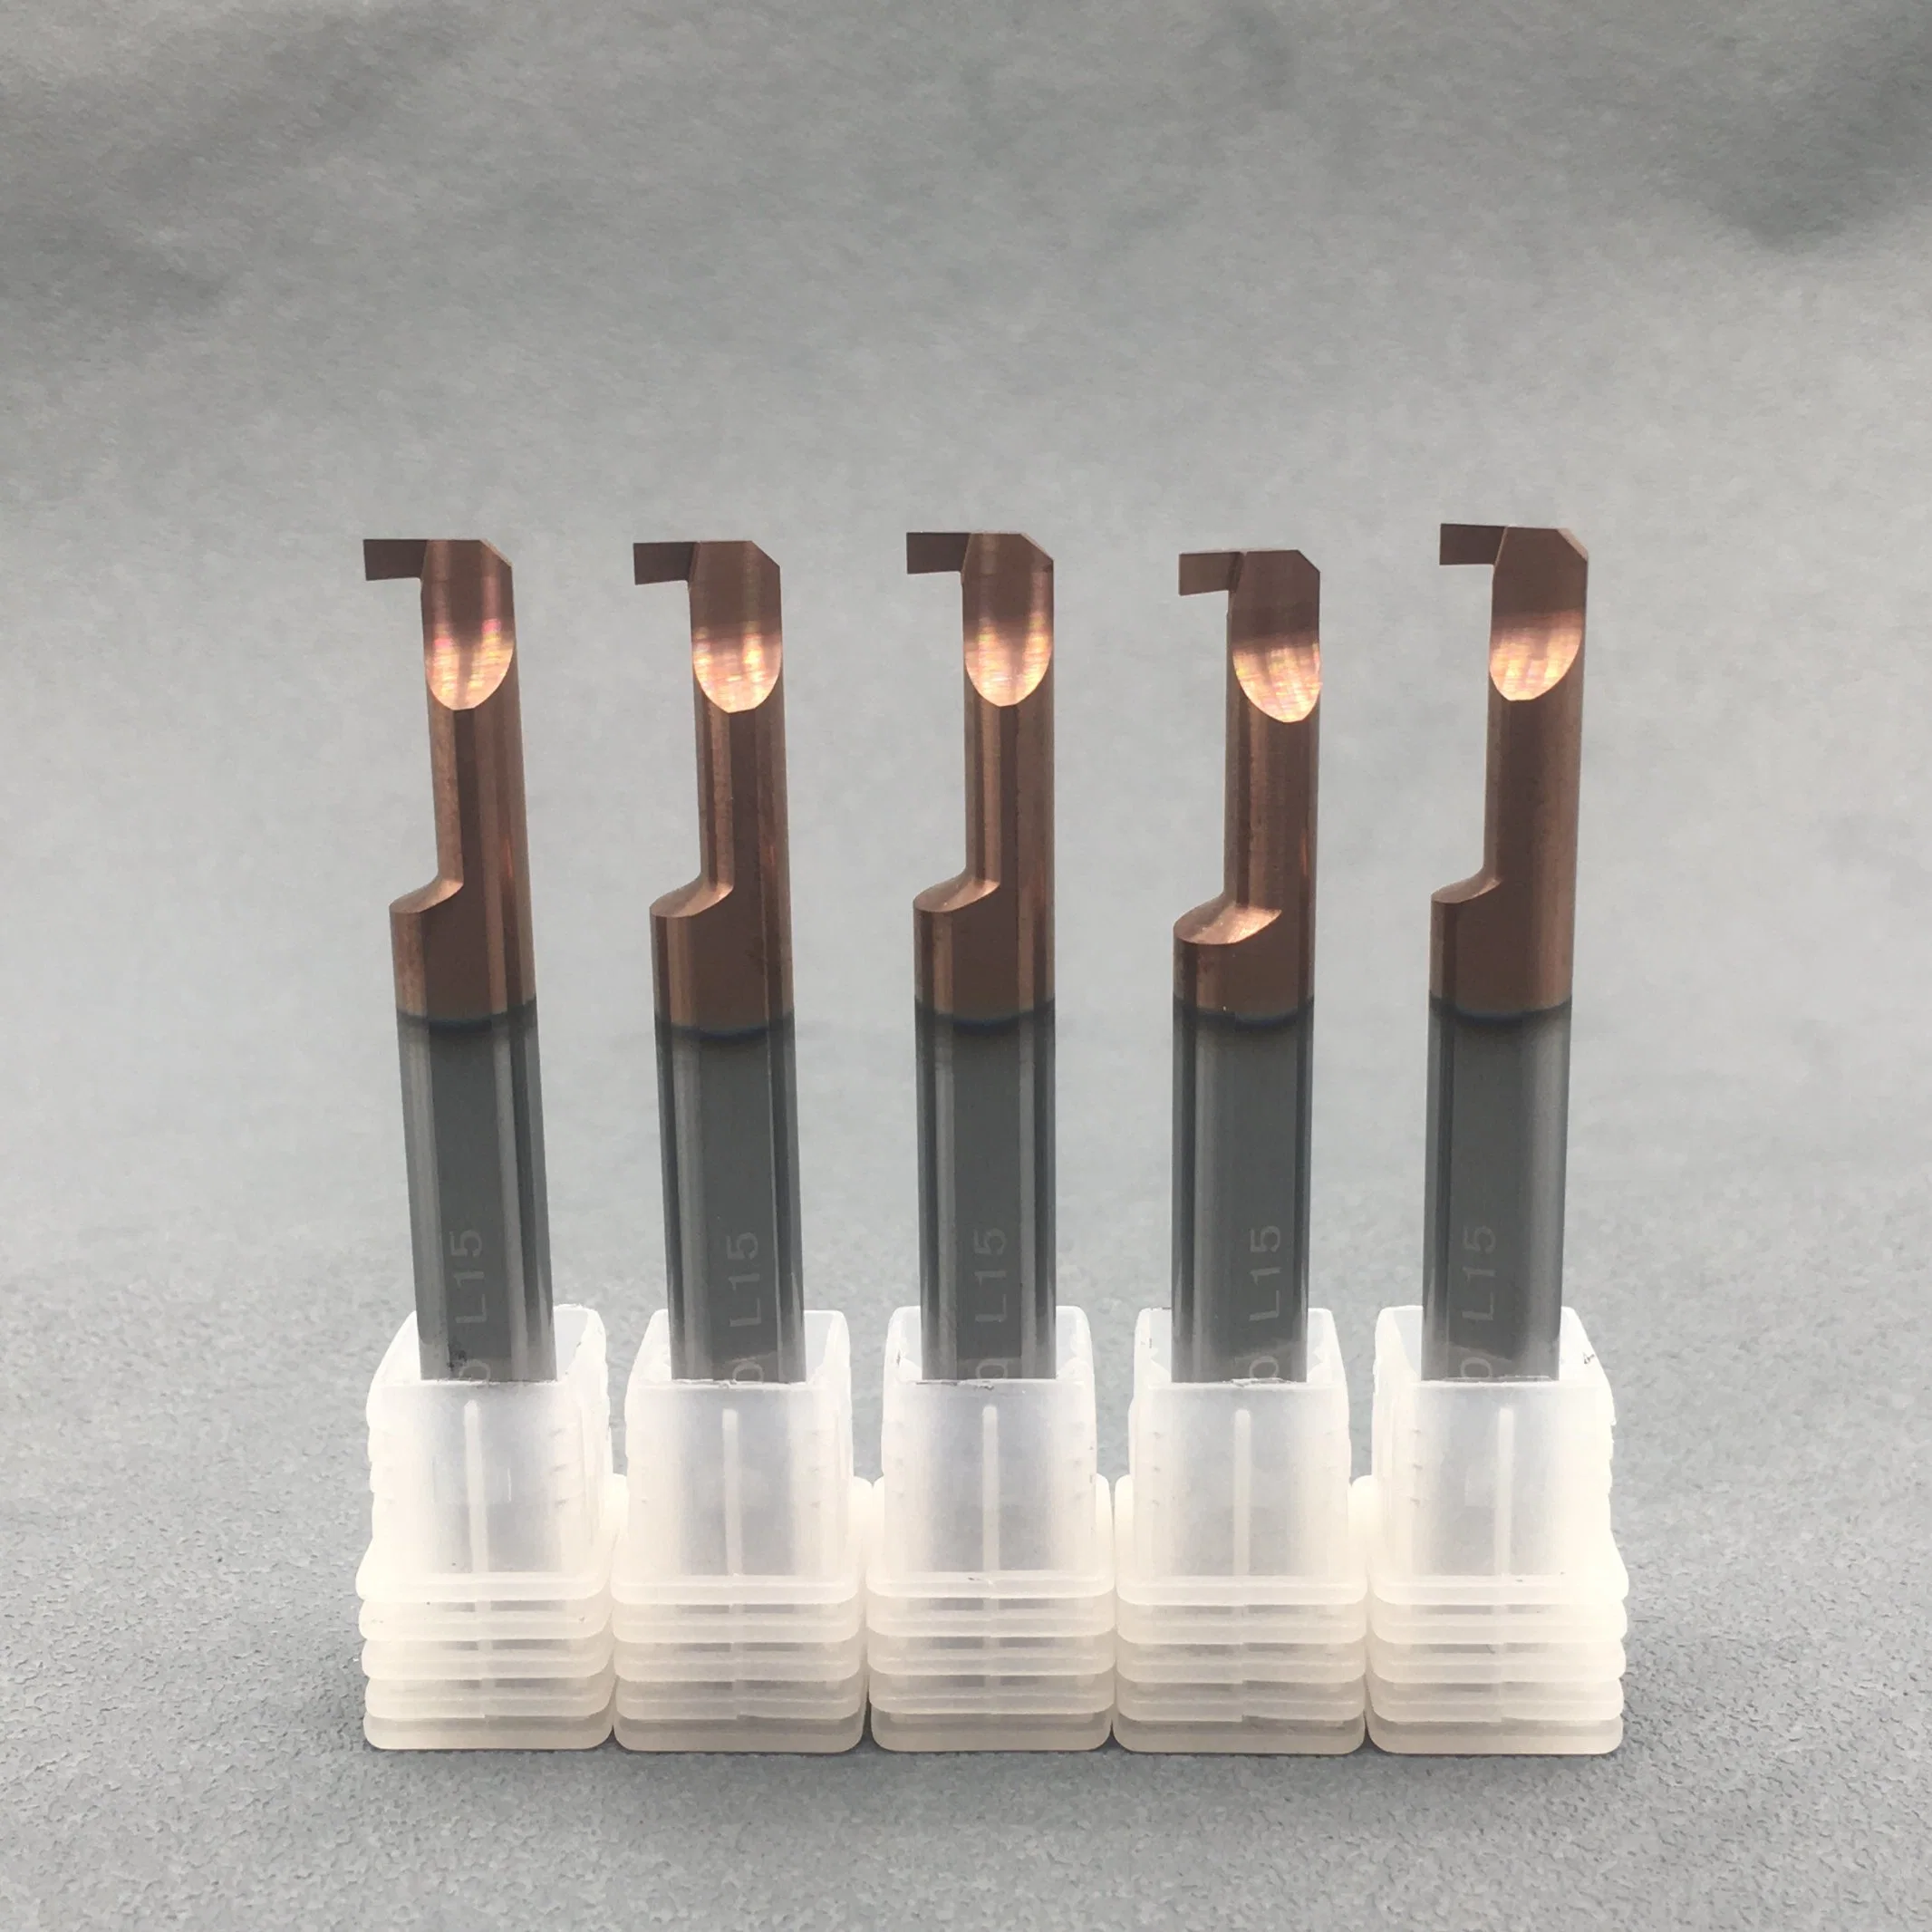 CNC Cutting Tools Right Hand Cut Straight Shank Tin Coated Solid Carbide Boring Bar for Profile Turning